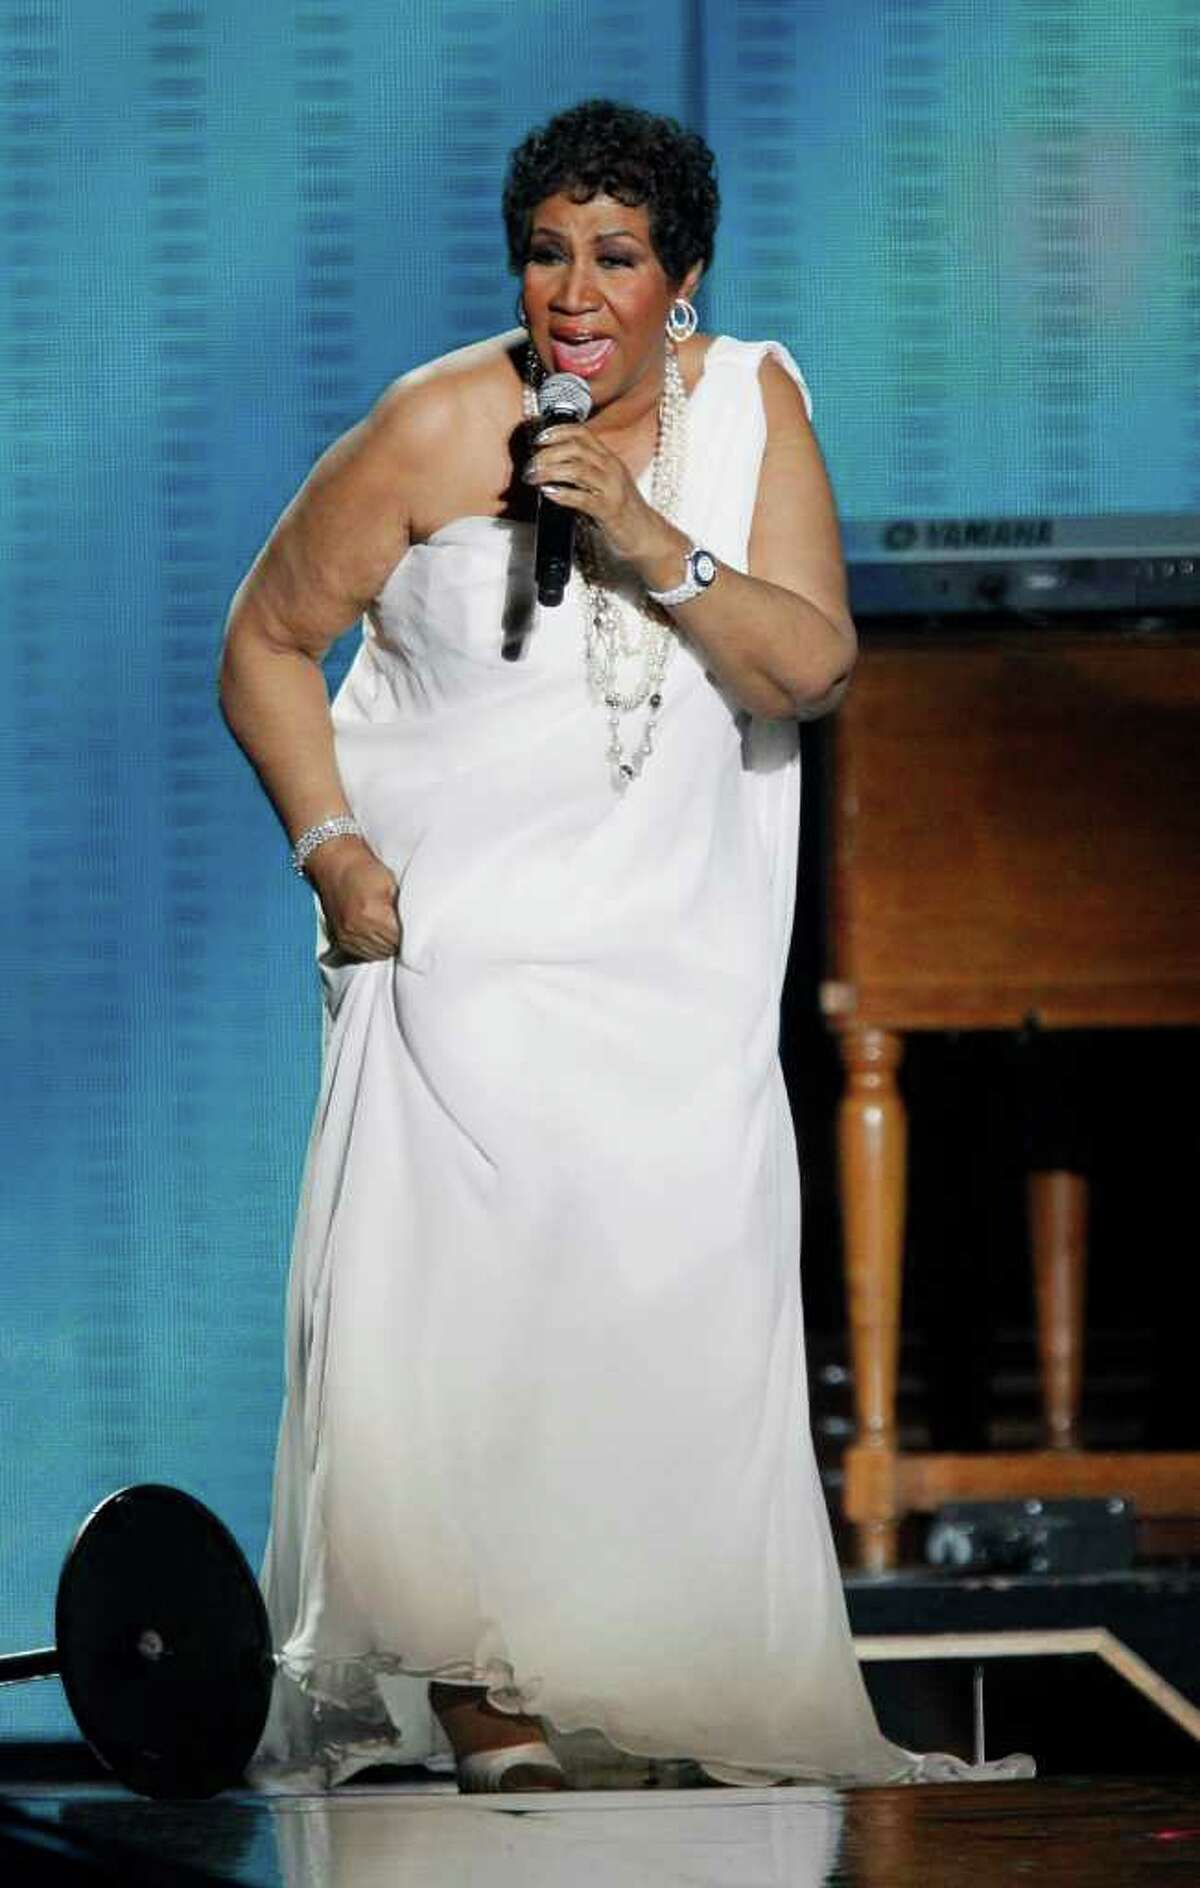 In this May 17, 2011, file photo, Aretha Franklin performs in Chicago. The Queen of Soul is performing in a hospital boot after stumbling over a designer shoe and fracturing a toe on her left foot during a private performance in Dallas, spokeswoman Tracey Jordan said Tuesday, June 21, 2011. (AP Photo/Charles Rex Arbogast, File)